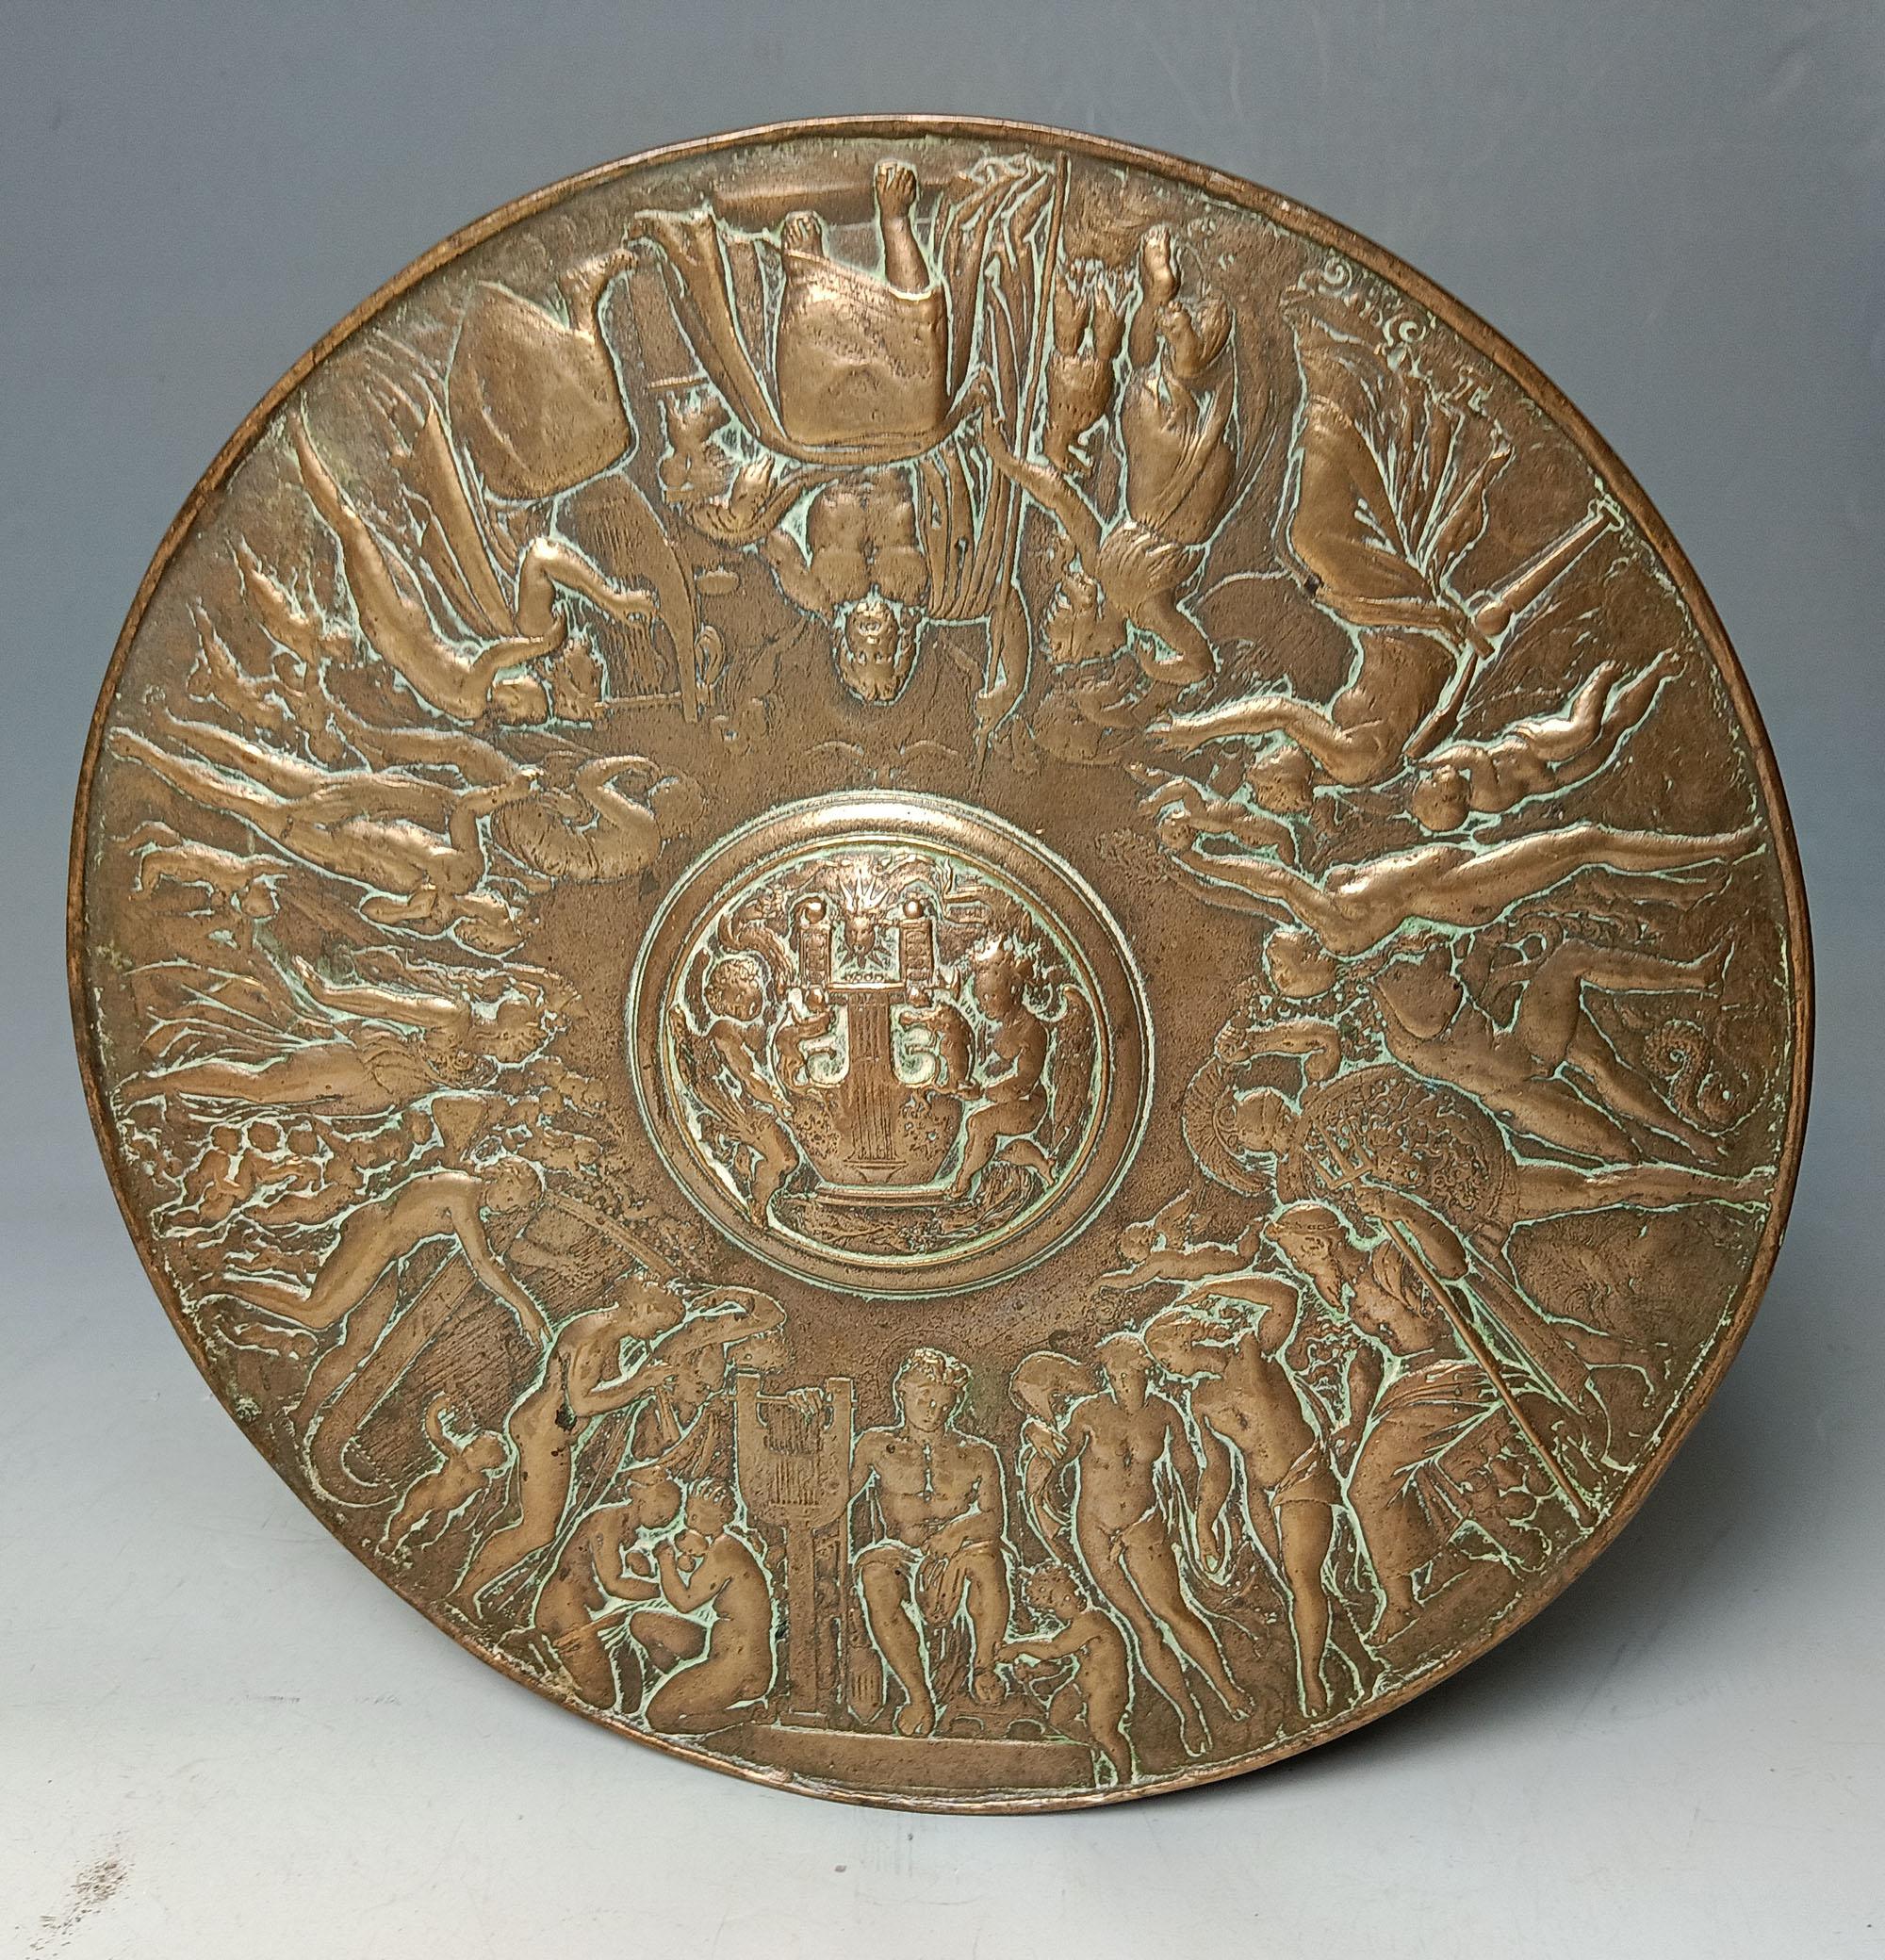 A Fine Large 19th century European Bronze classical style shield charger  
Finely decorated with Greek and Romanesque scenes, 
of figures in various pursuits. 
32 cm diameter.
Nice aged patina 
Very good condition,
Period 19th Century Probably a